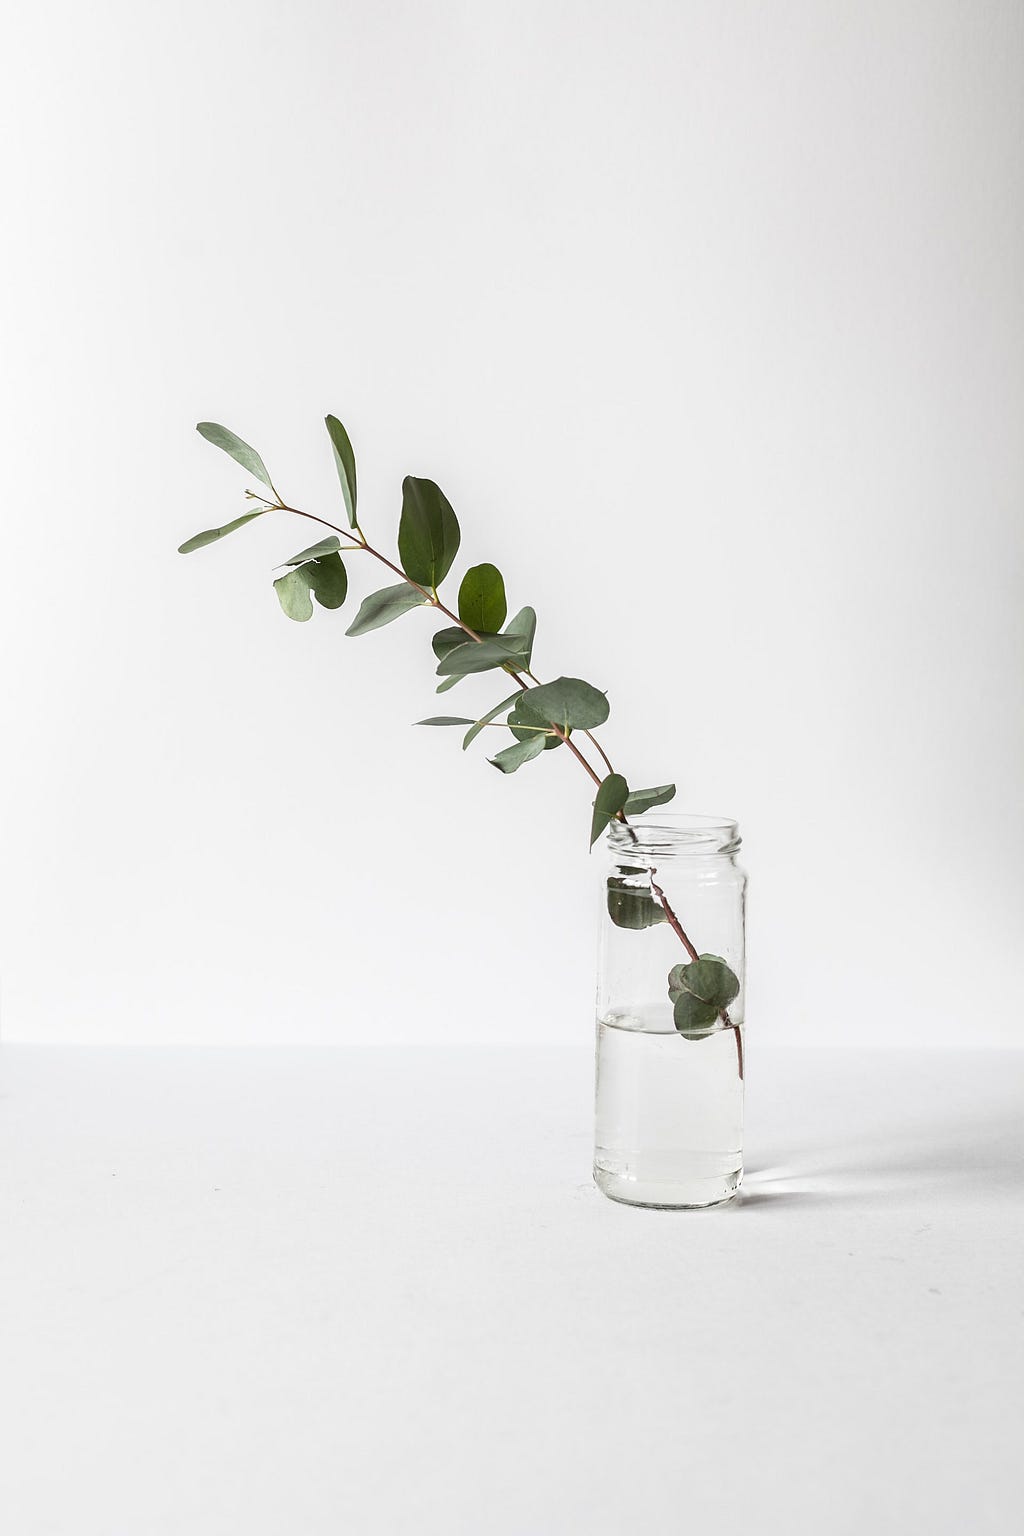 A eucalyptus plant branch in a glass of water.